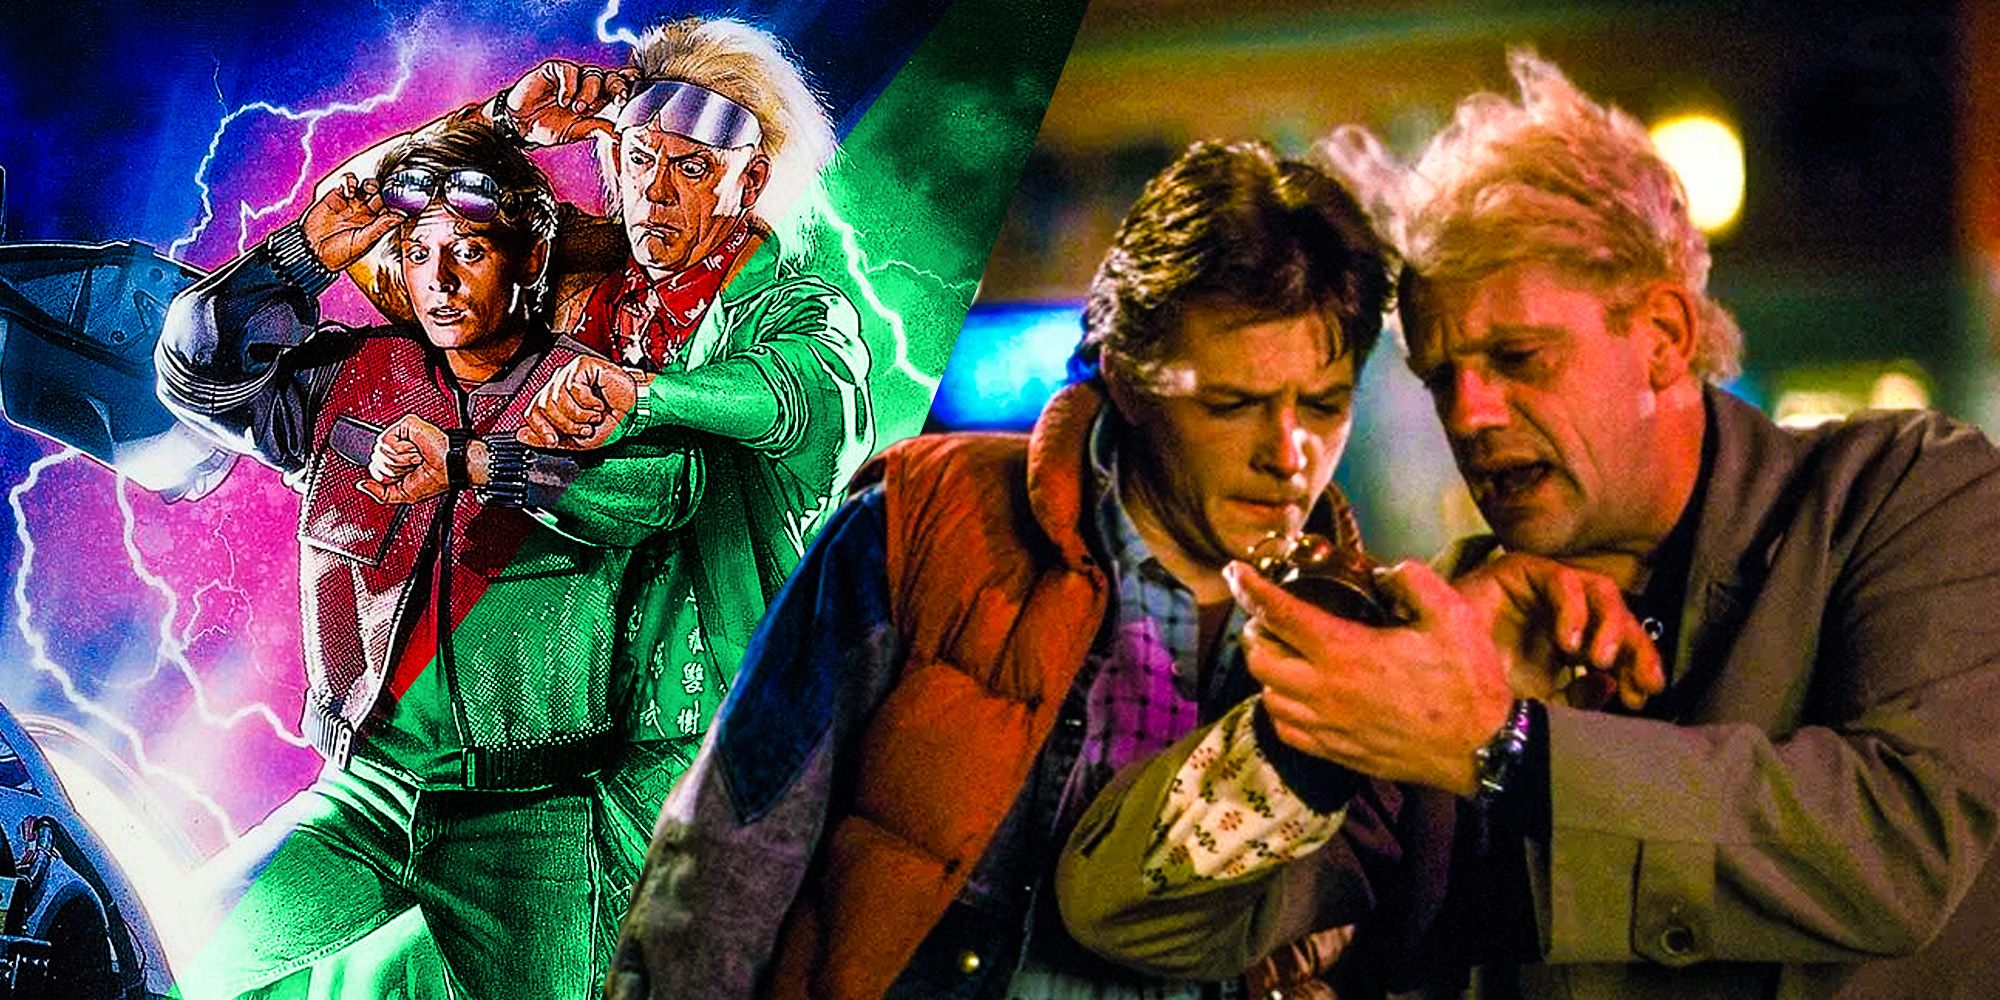 time travel like back to the future